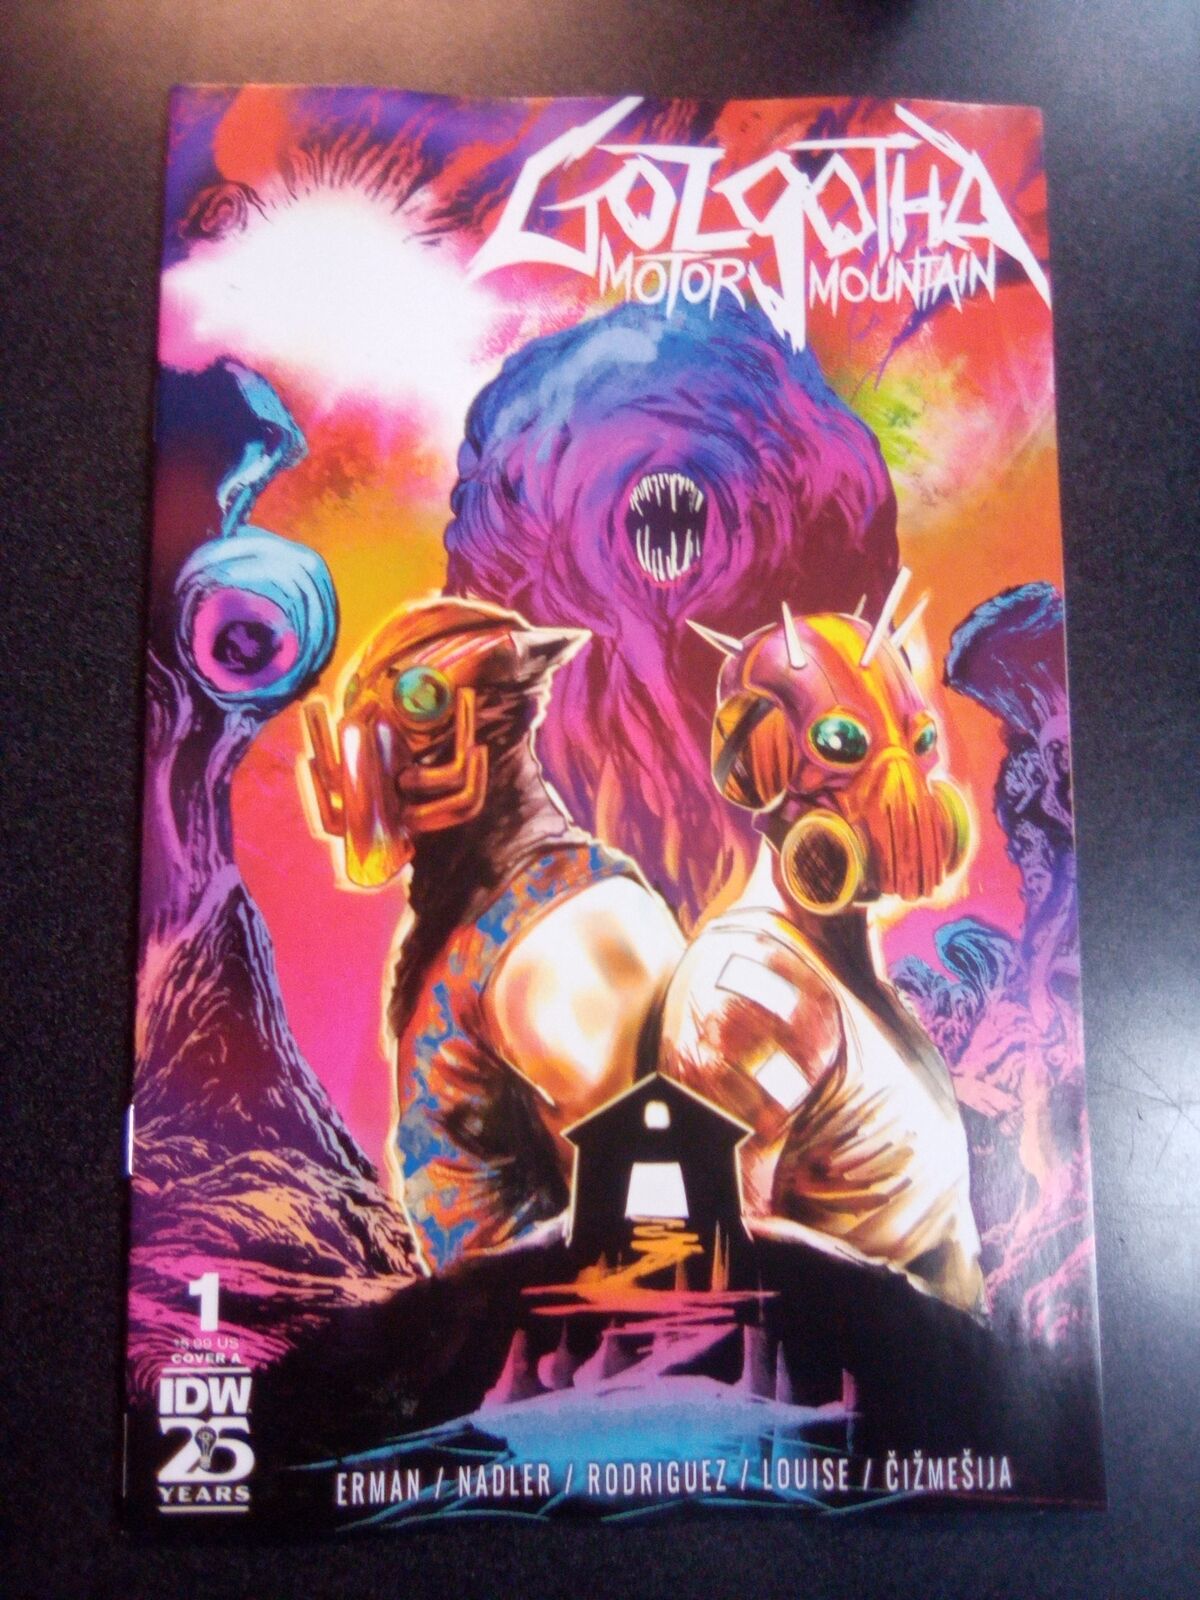 Golgotha Motor Mountain #1 Cover A (Rodriguez) Comic Book First Print